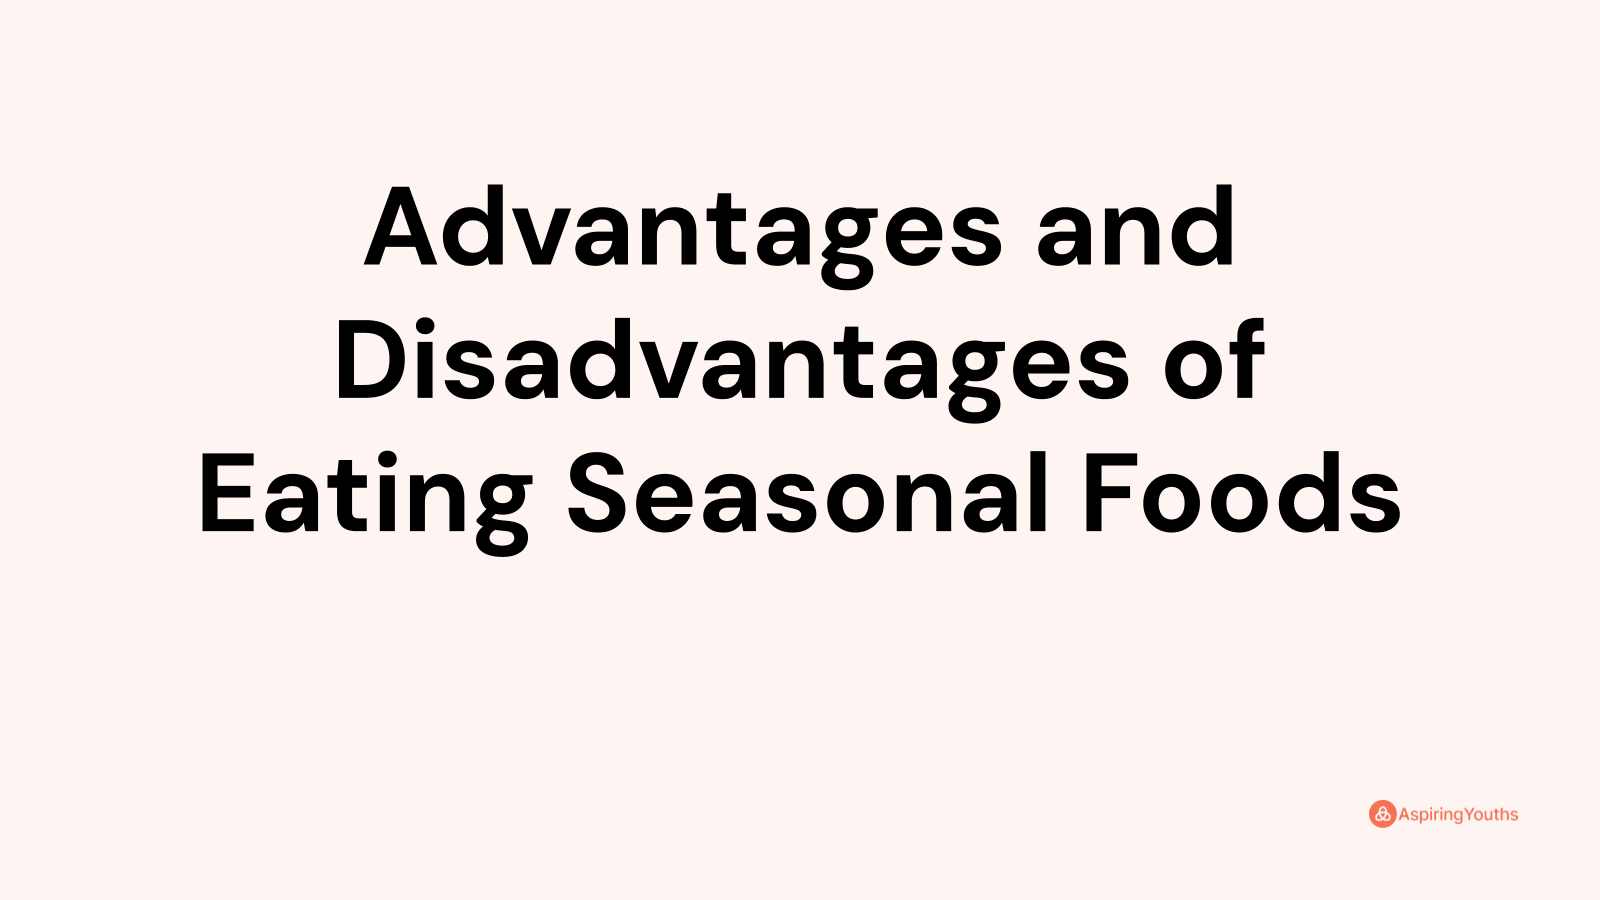 Advantages and disadvantages of Eating Seasonal Foods